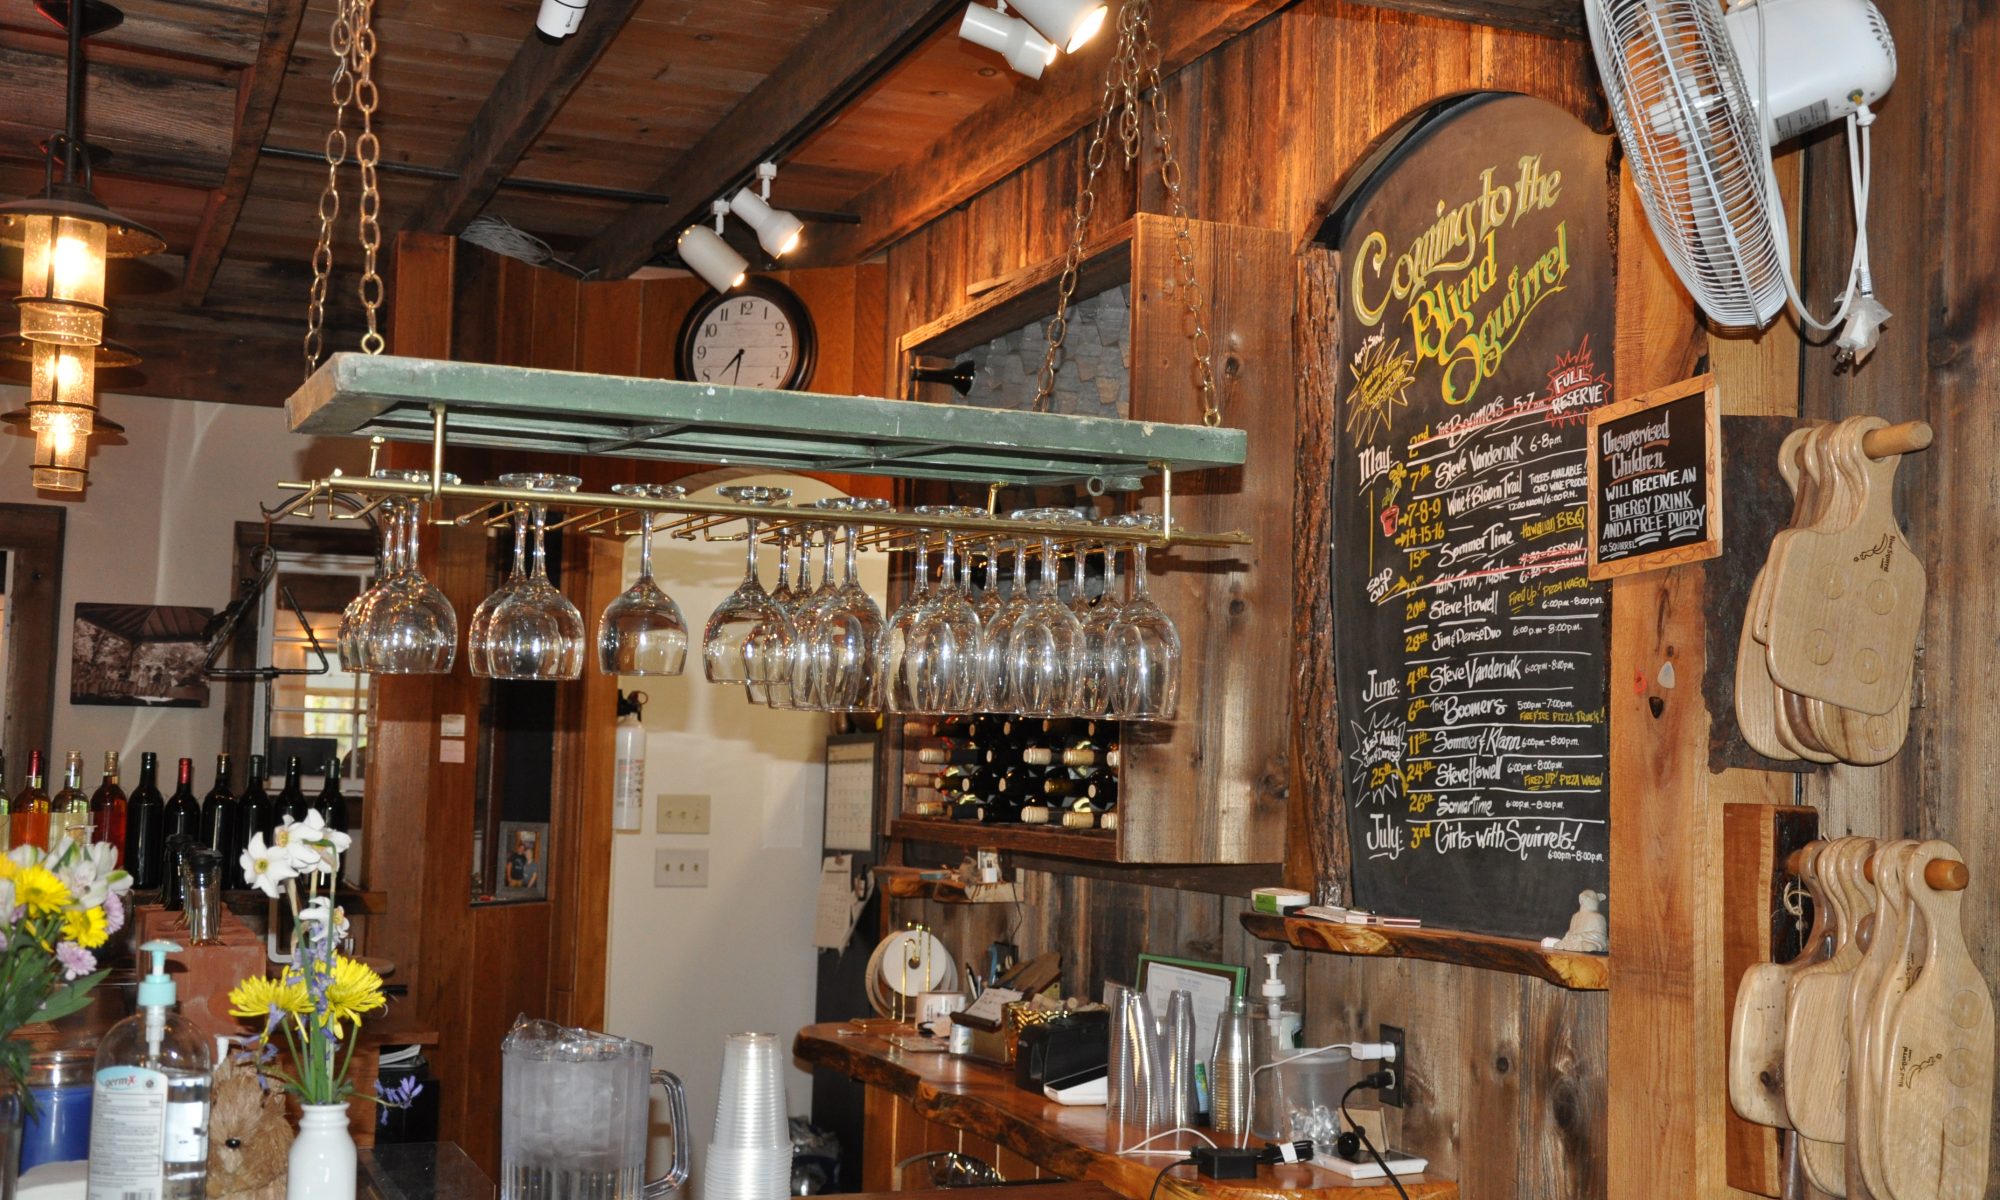 The Blind Squirrel Winery